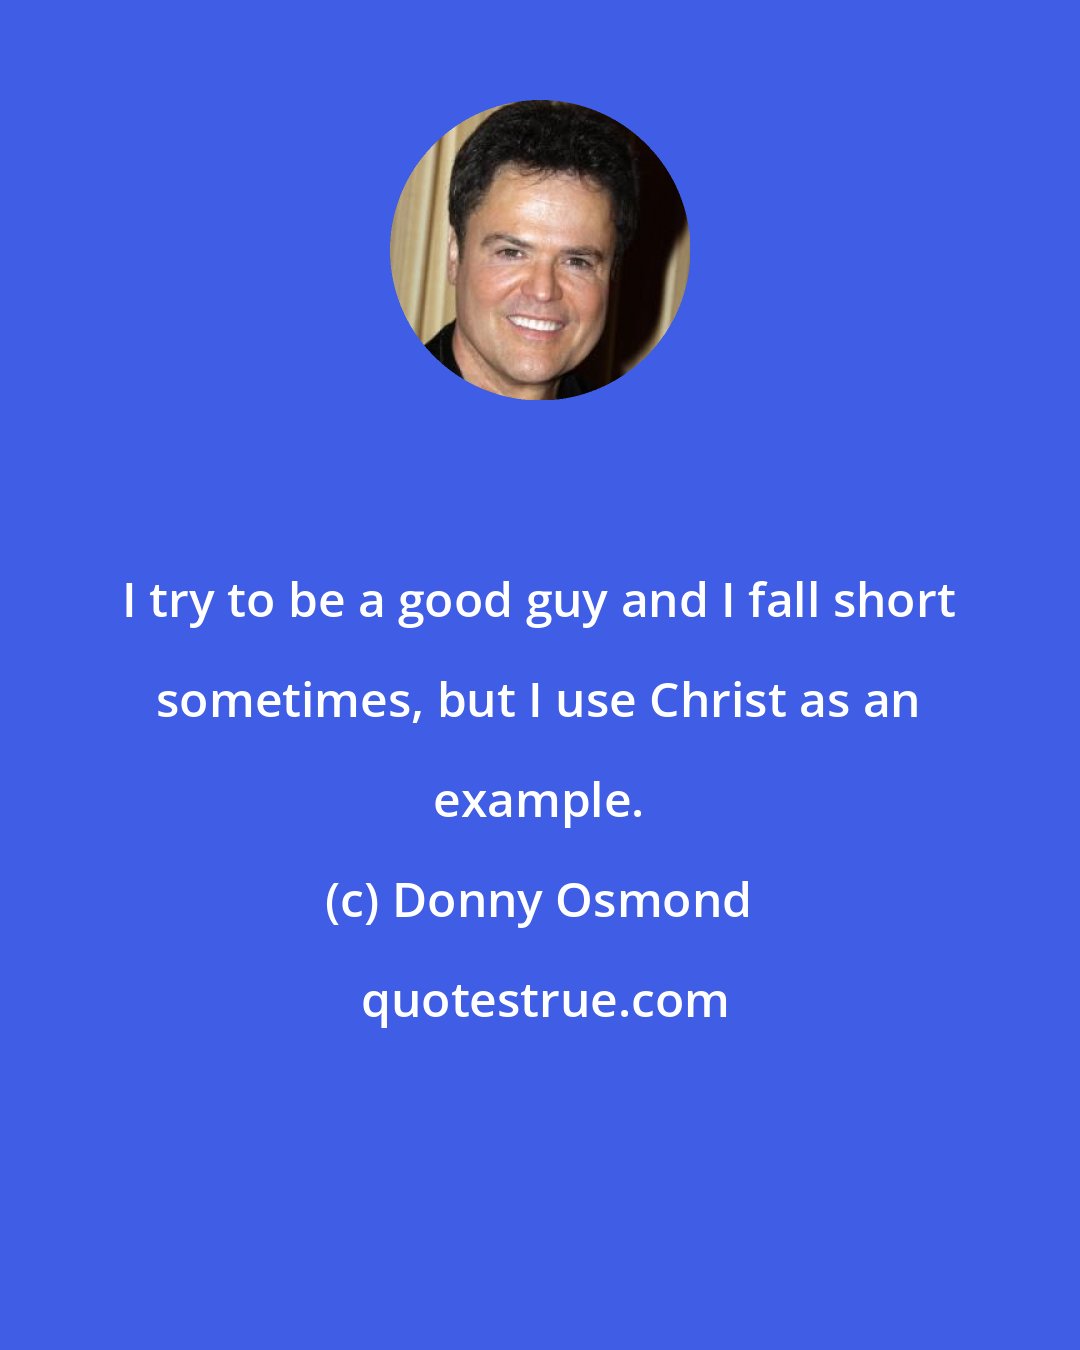 Donny Osmond: I try to be a good guy and I fall short sometimes, but I use Christ as an example.